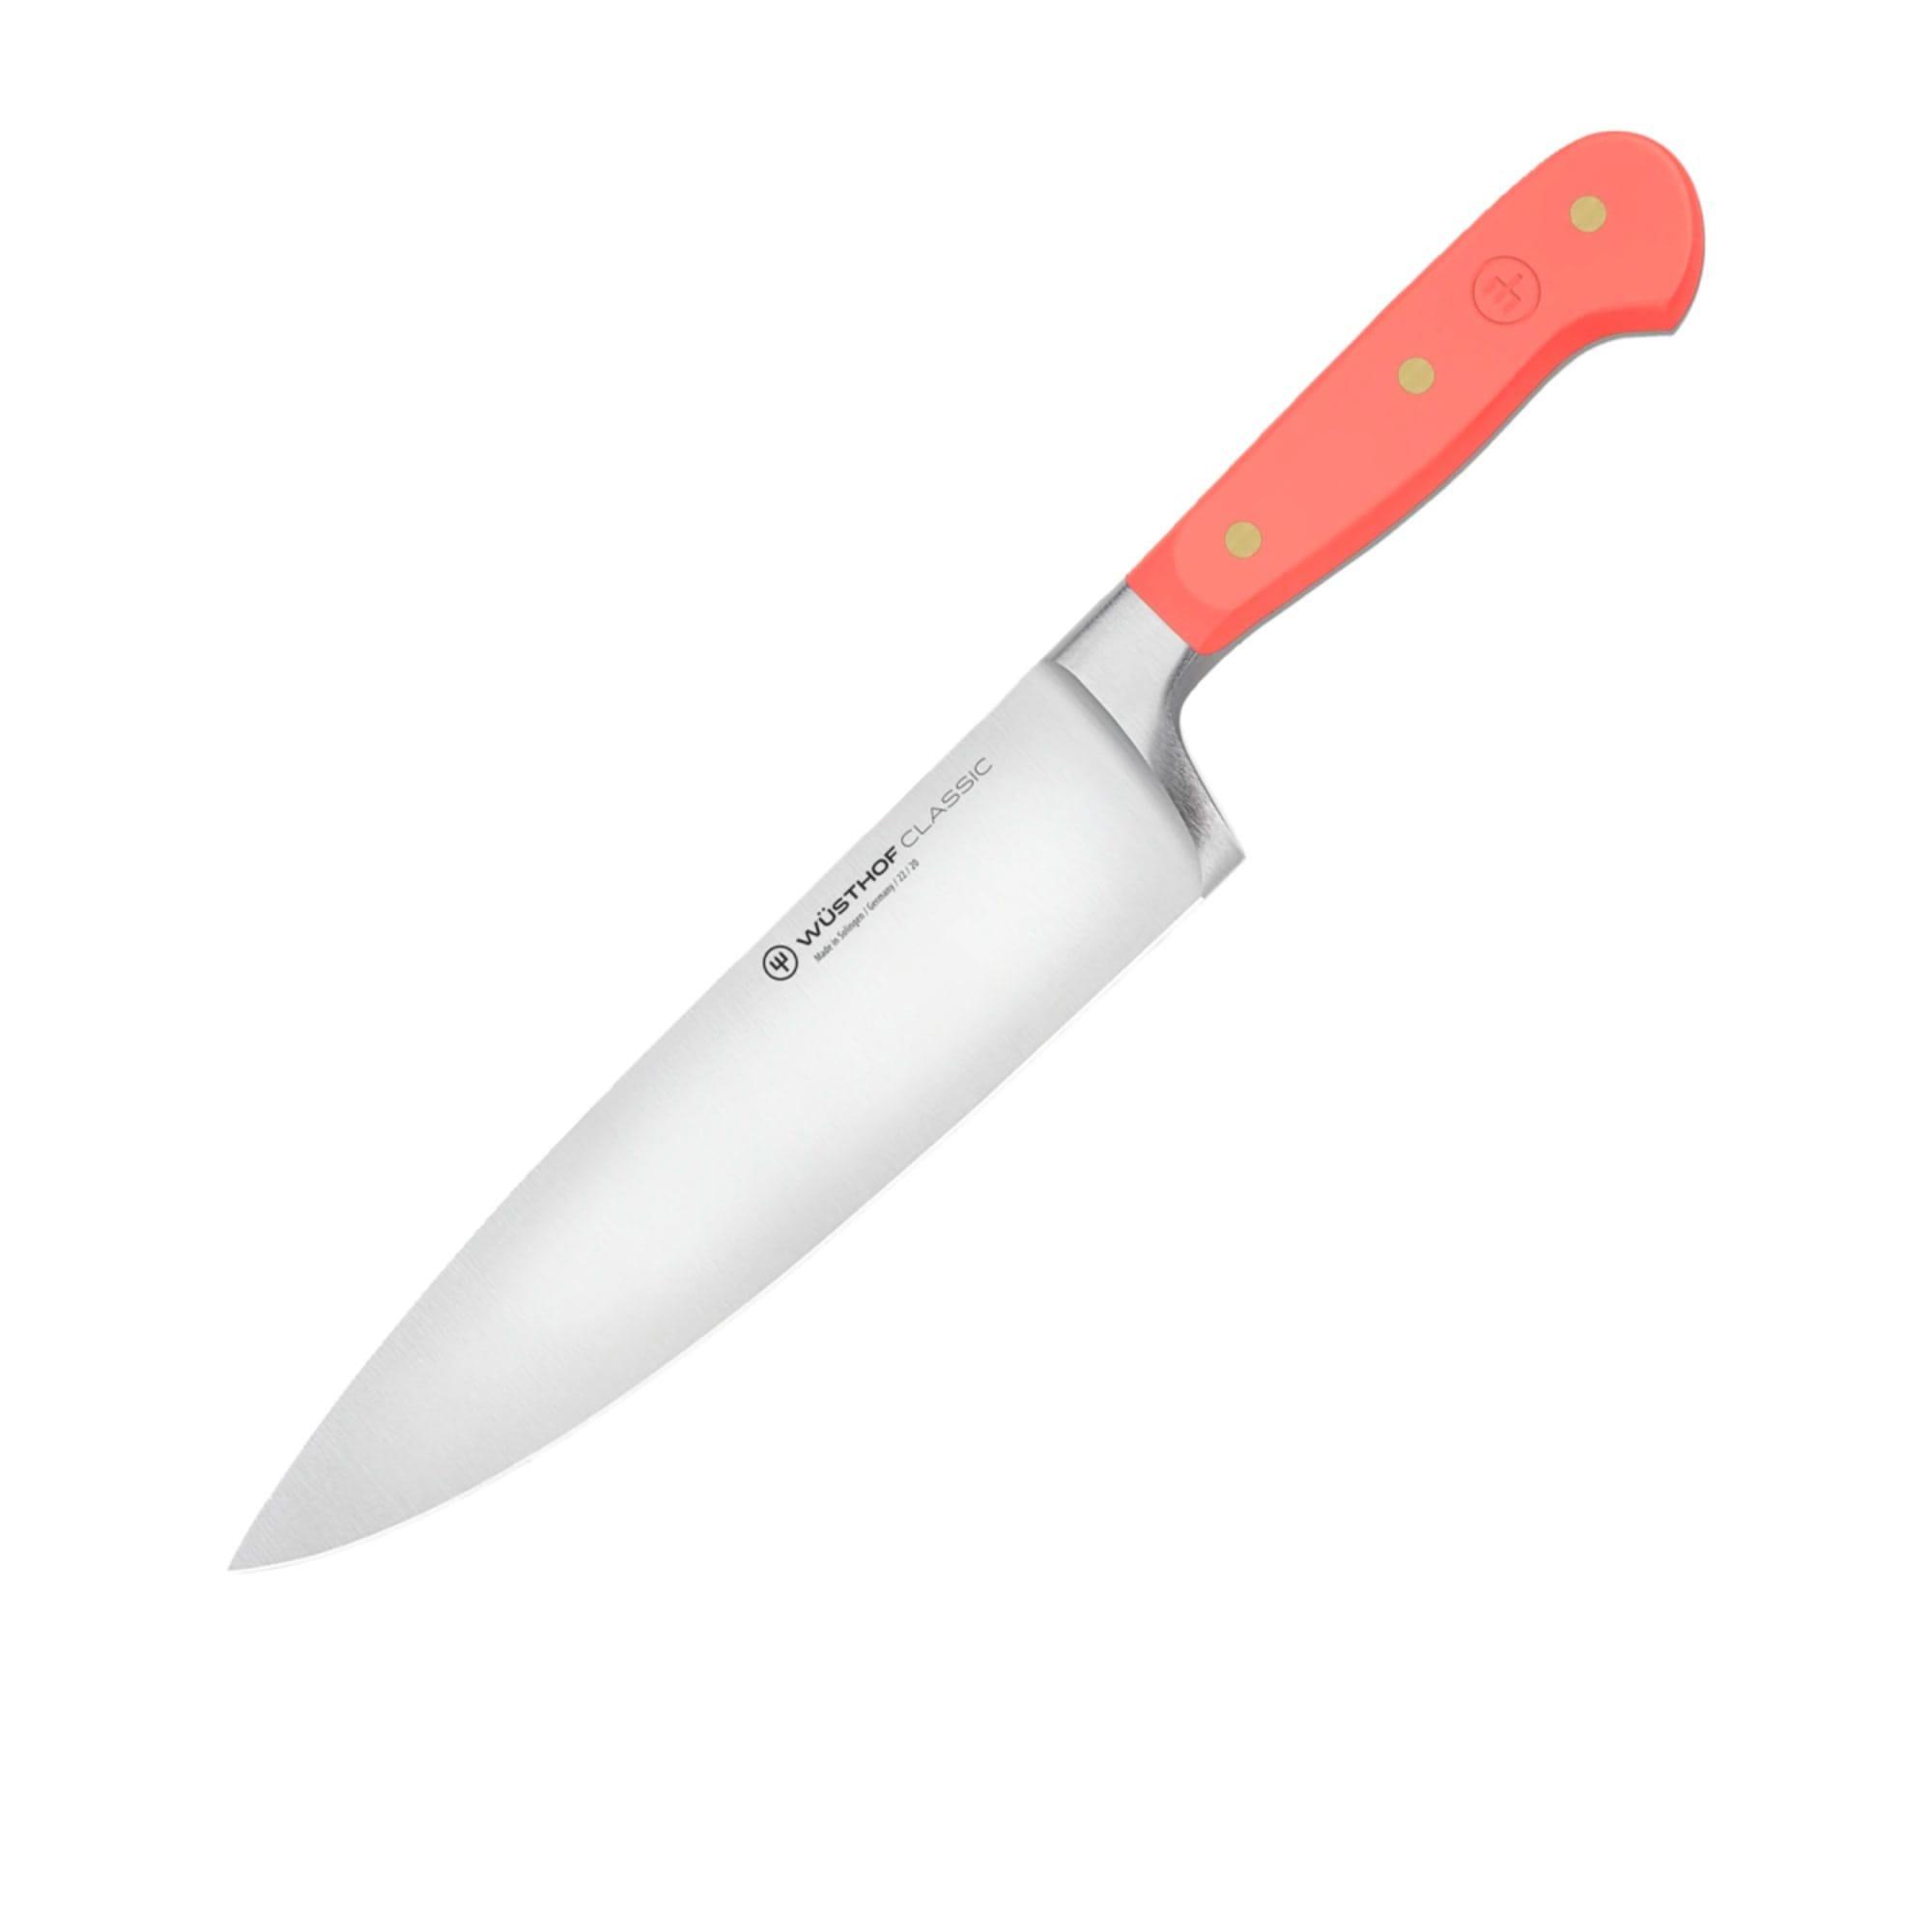 Wusthof Classic Colour Chef's Knife 20cm Coral Peach Image 1